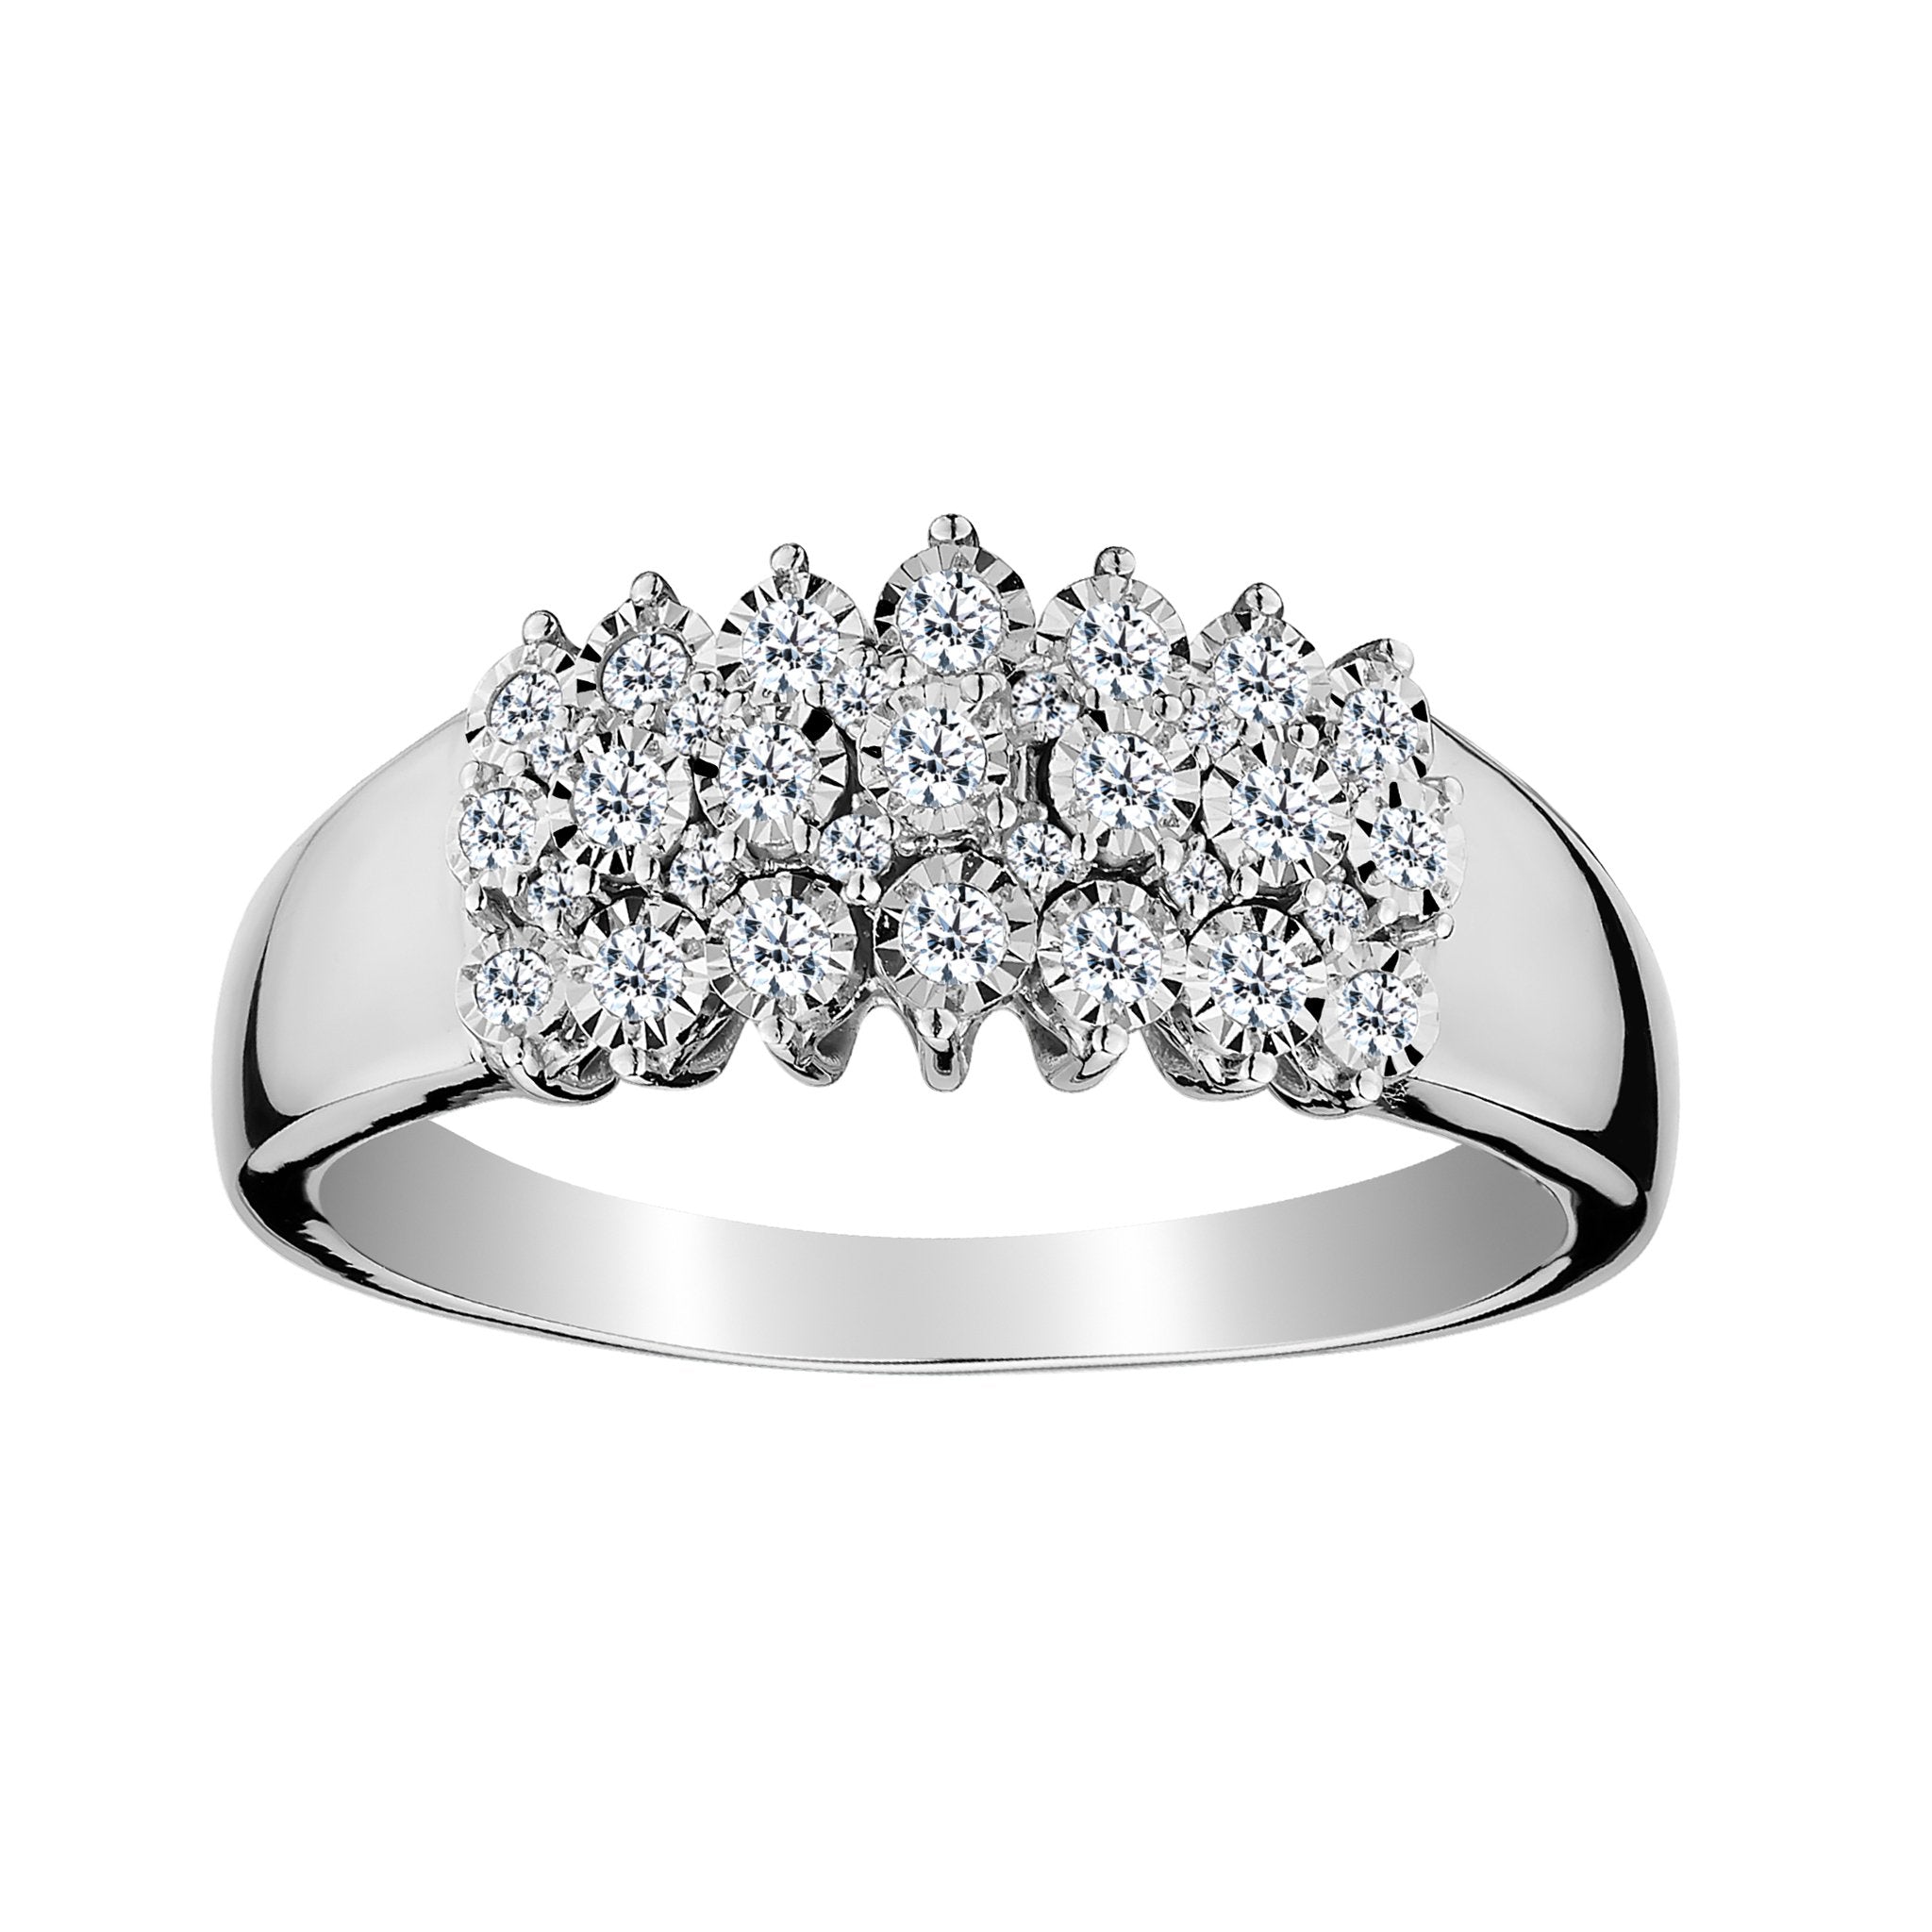 .25 CARAT DIAMOND "STAIRWAY TO HEAVEN" RING, 10kt WHITE GOLD. Fashion Rings - Griffin Jewellery Designs